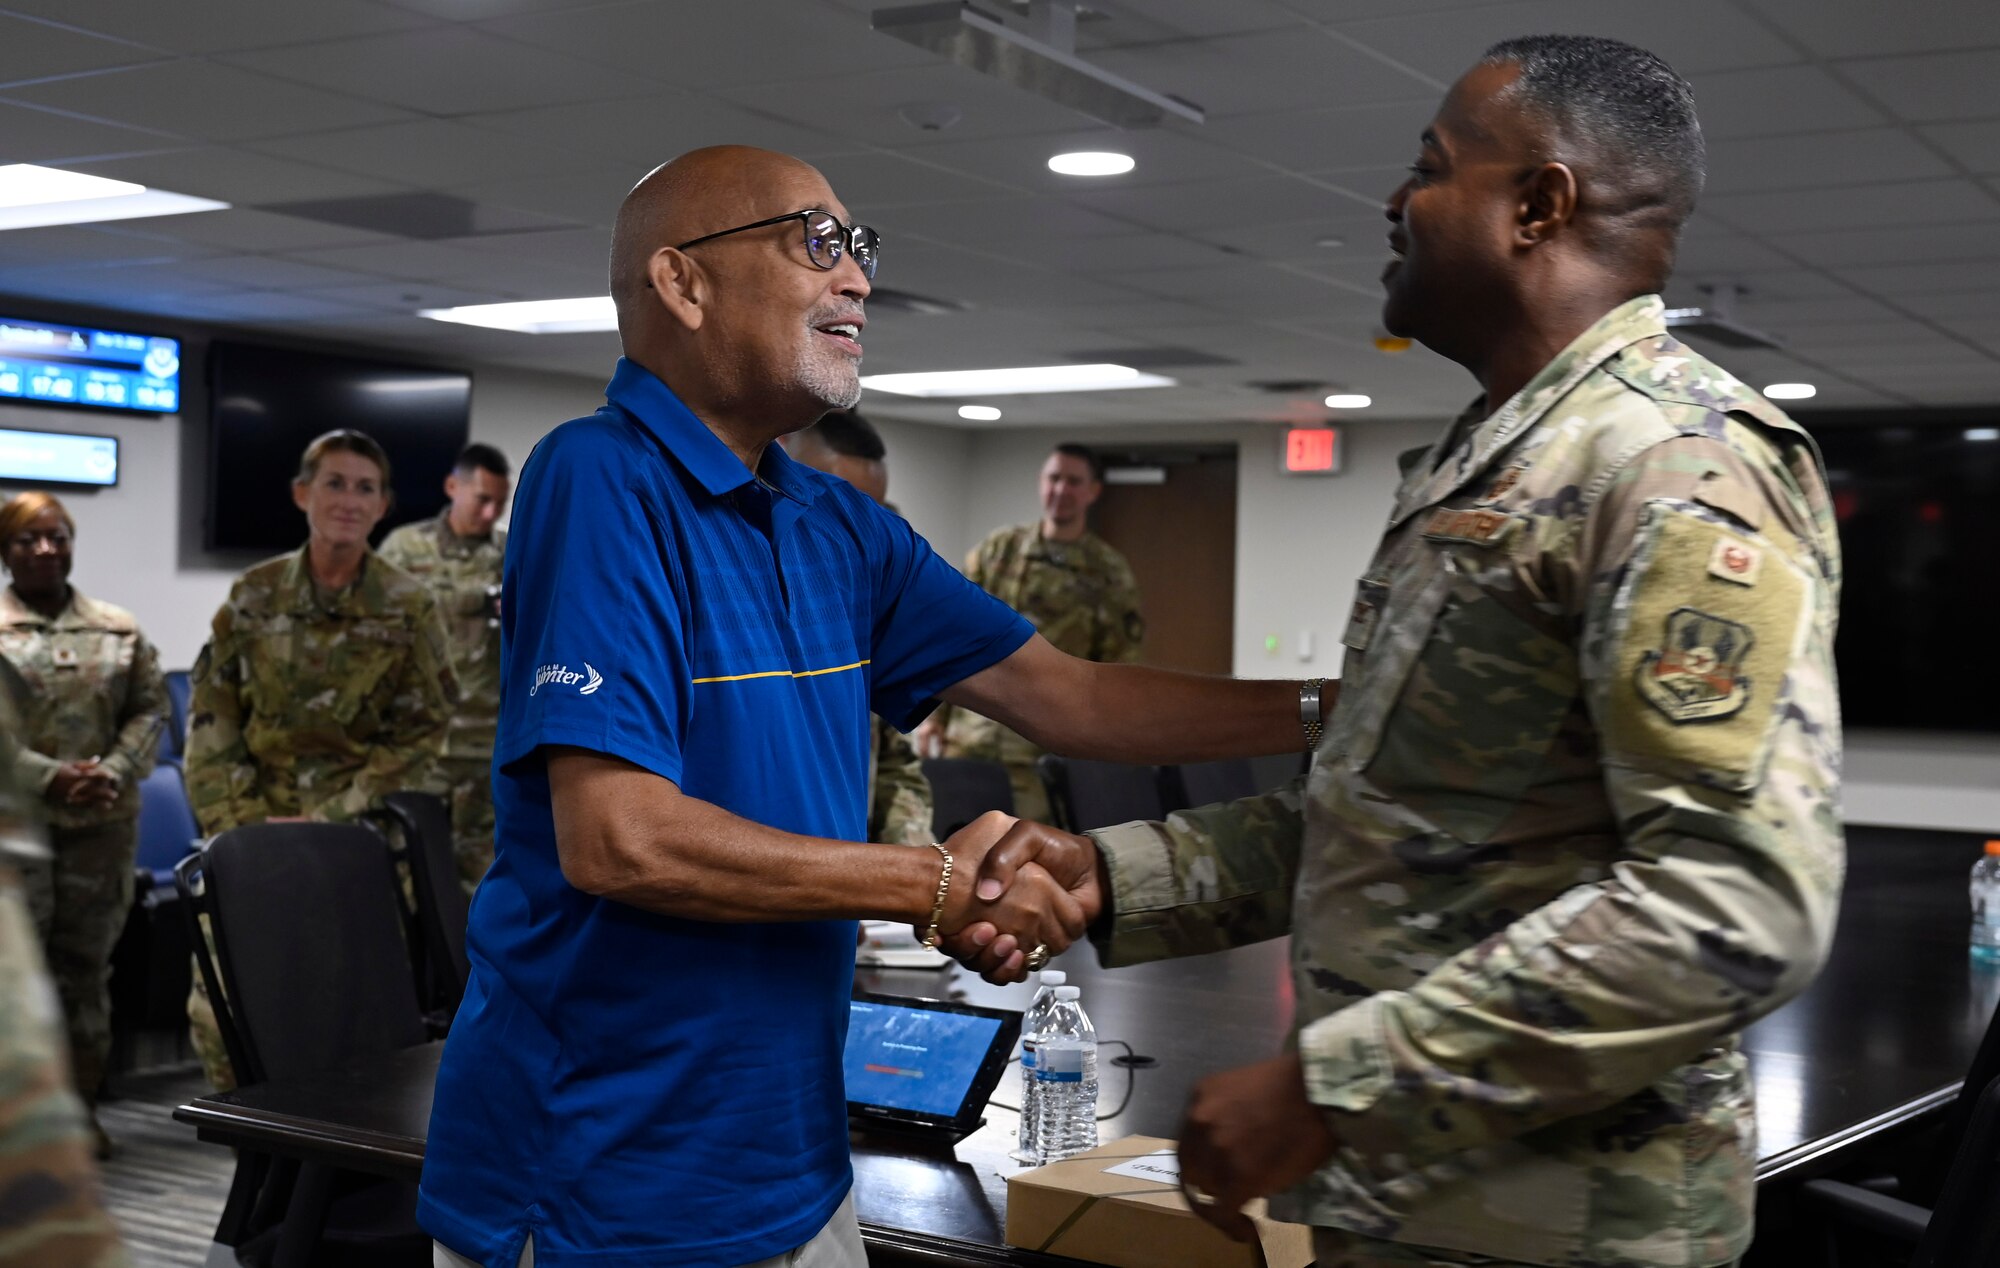 James T. McCain Jr., left, Sumter County council chairman, speaks with U.S. Air Force Col. Derrick J. Floyd, right, Ninth Air Forces (Air Forces Central) Manpower and Personnel director, at Shaw Air Force Base, South Carolina, Sept. 12, 2022. McCain Jr. spoke to AFCENT personnel about his personal connection to the local community in addition to the importance of diversity and inclusion. (U.S. Air Force by Senior Master Sgt. Nadine Barclay)